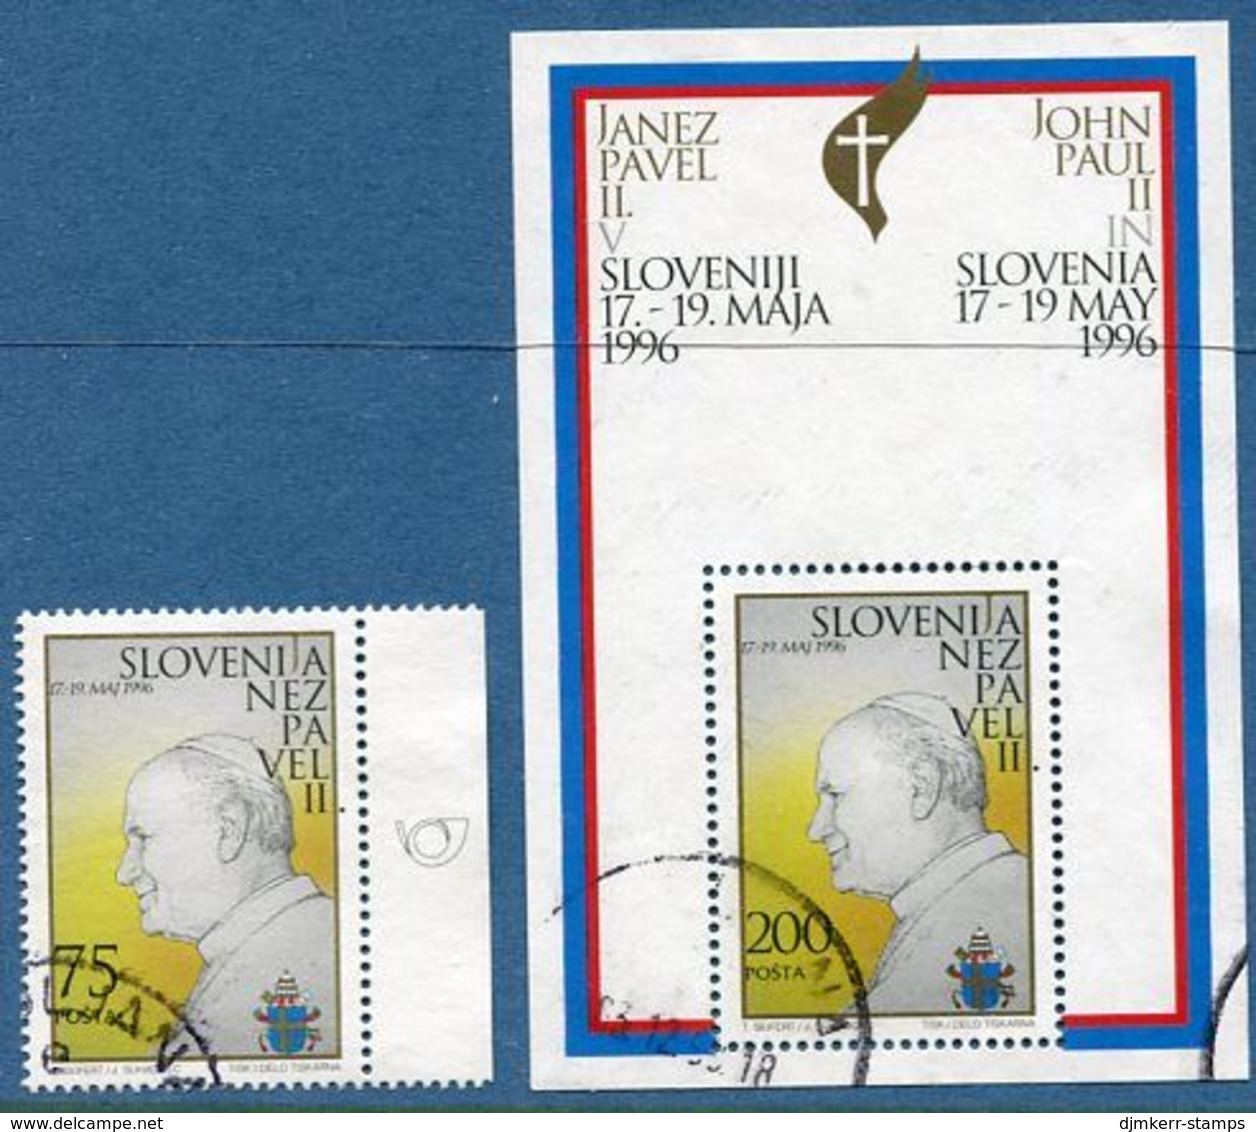 SLOVENIA 1996 Papal Visit Stamp And Block Used..  Michel 144 + Block 2 - Slowenien